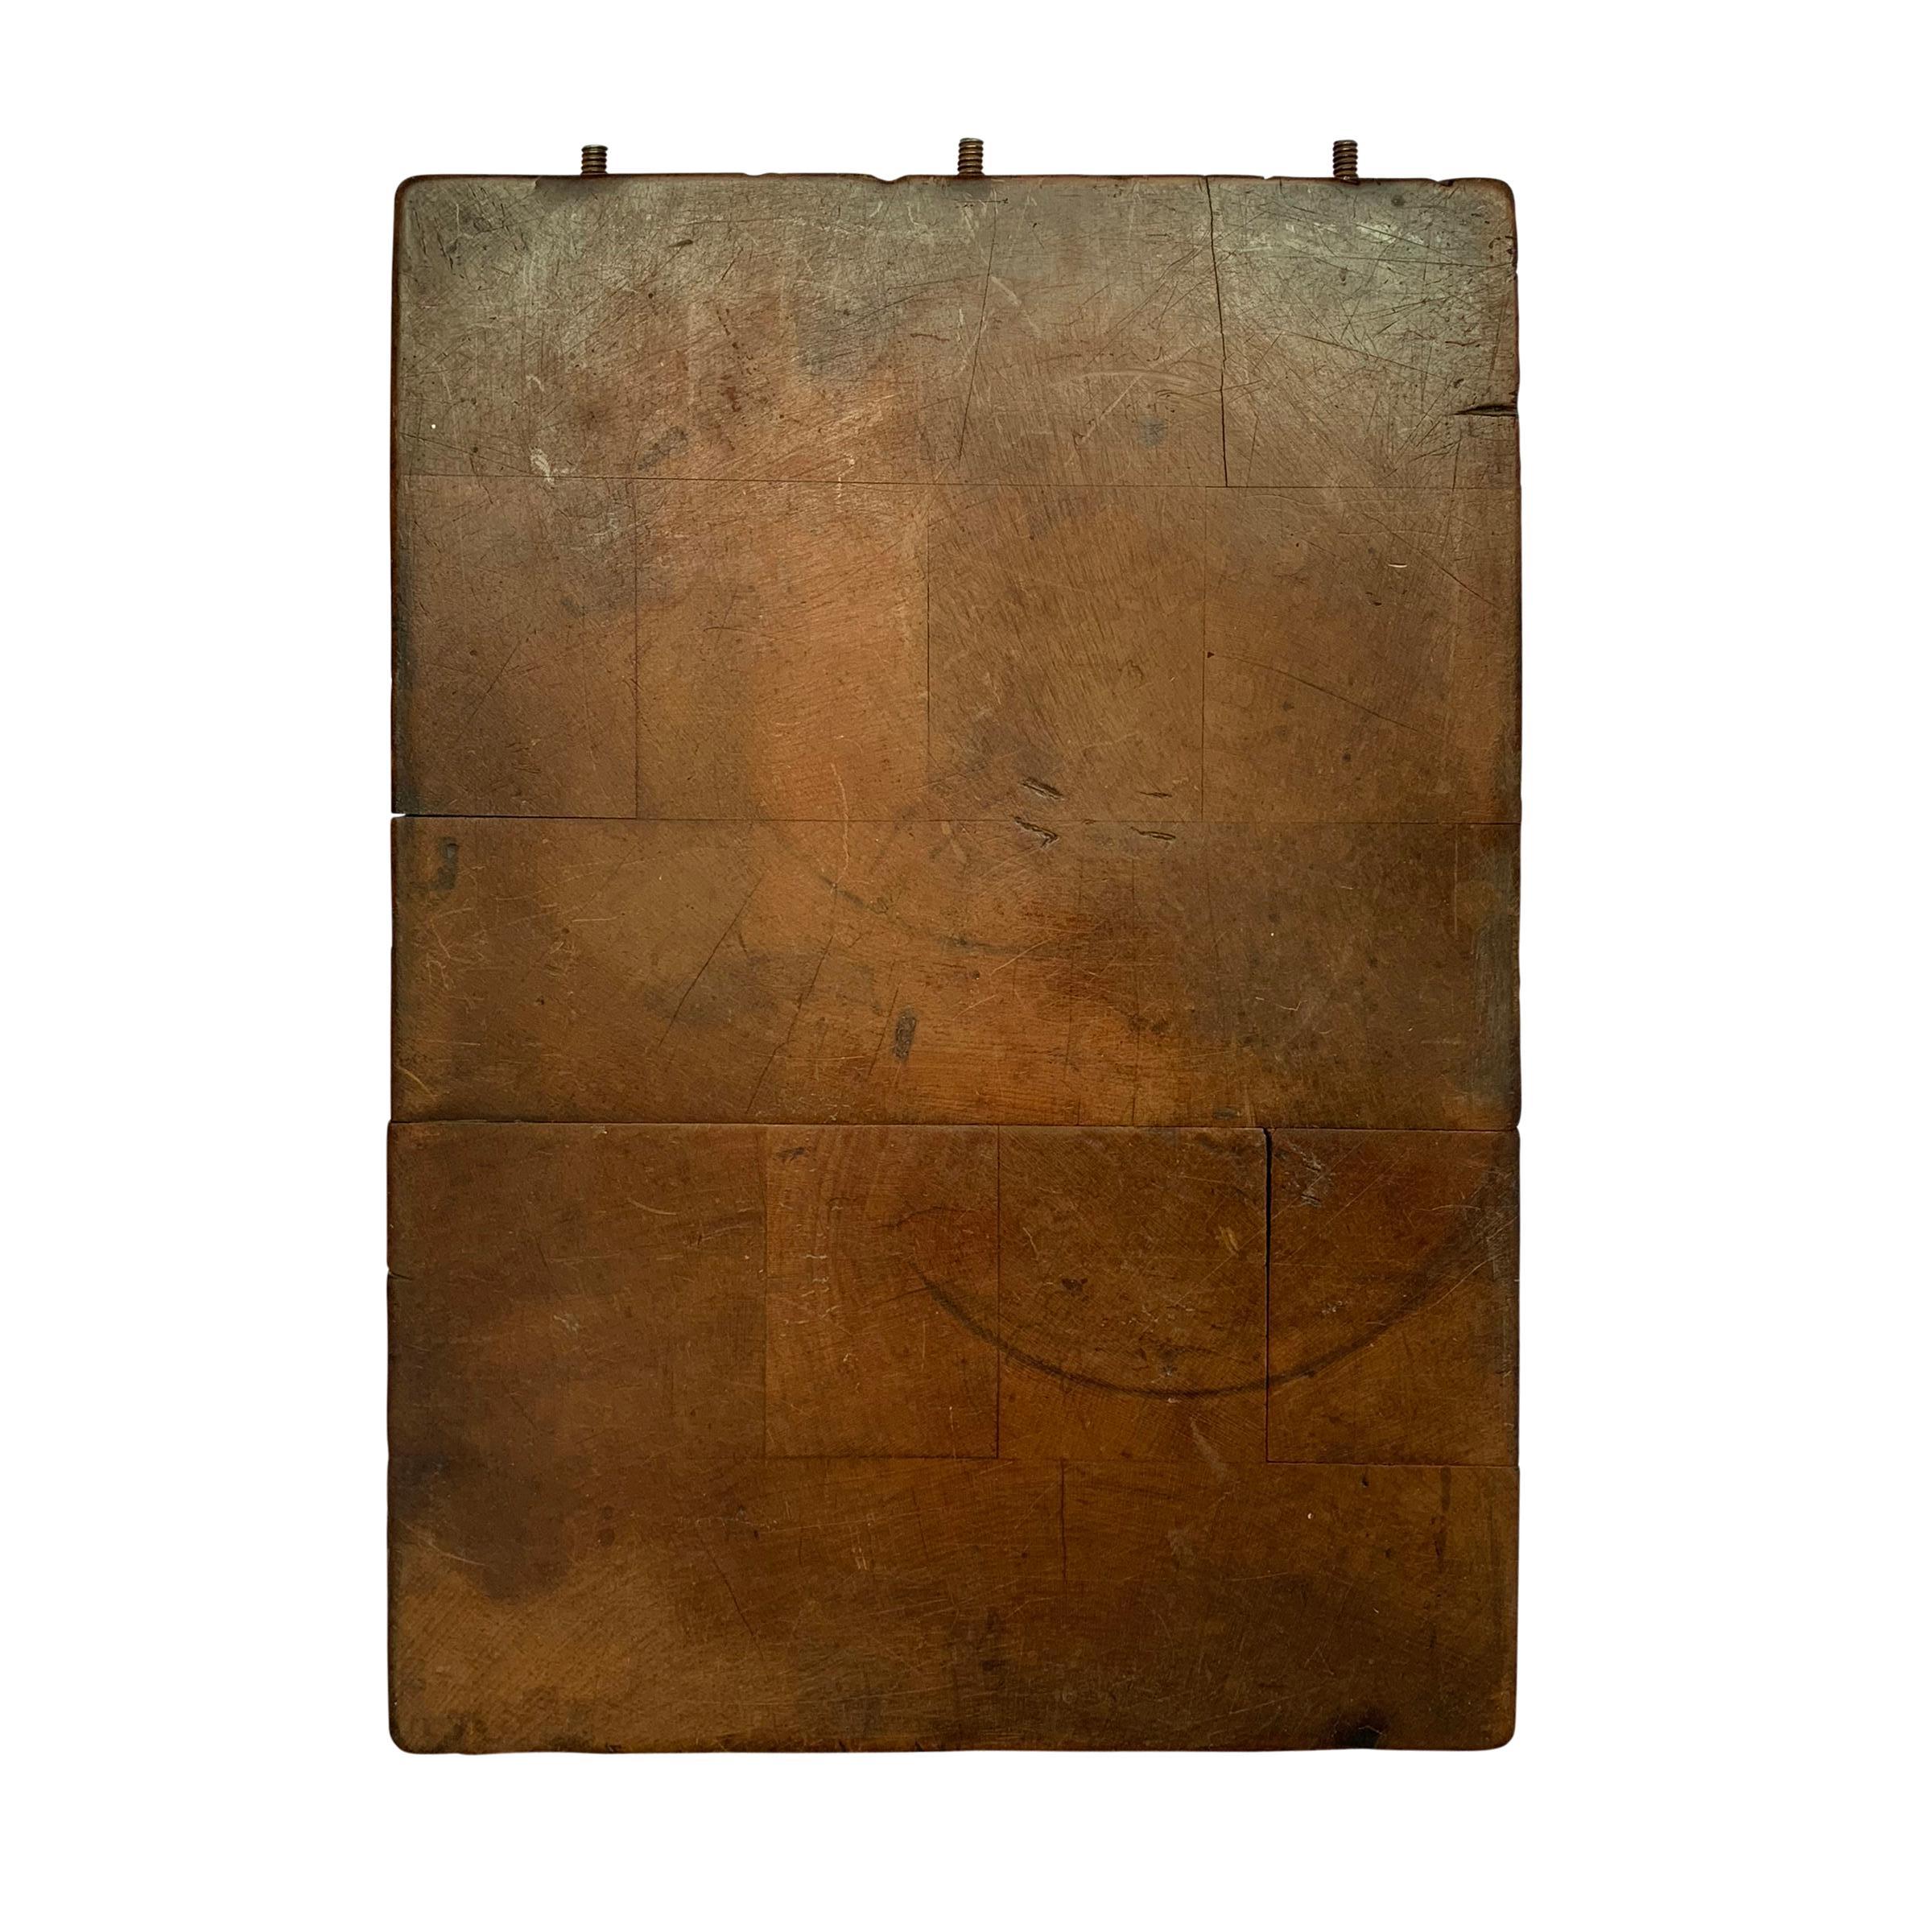 A beautiful maple tobacco leaf cutting board with a fantastic patina from the Miller, DuBrul & Peters Mfg. Co. MDP was established in 1870 in New York City and supplied machinery, tools, and other products for the post Civil War tobacco industry.